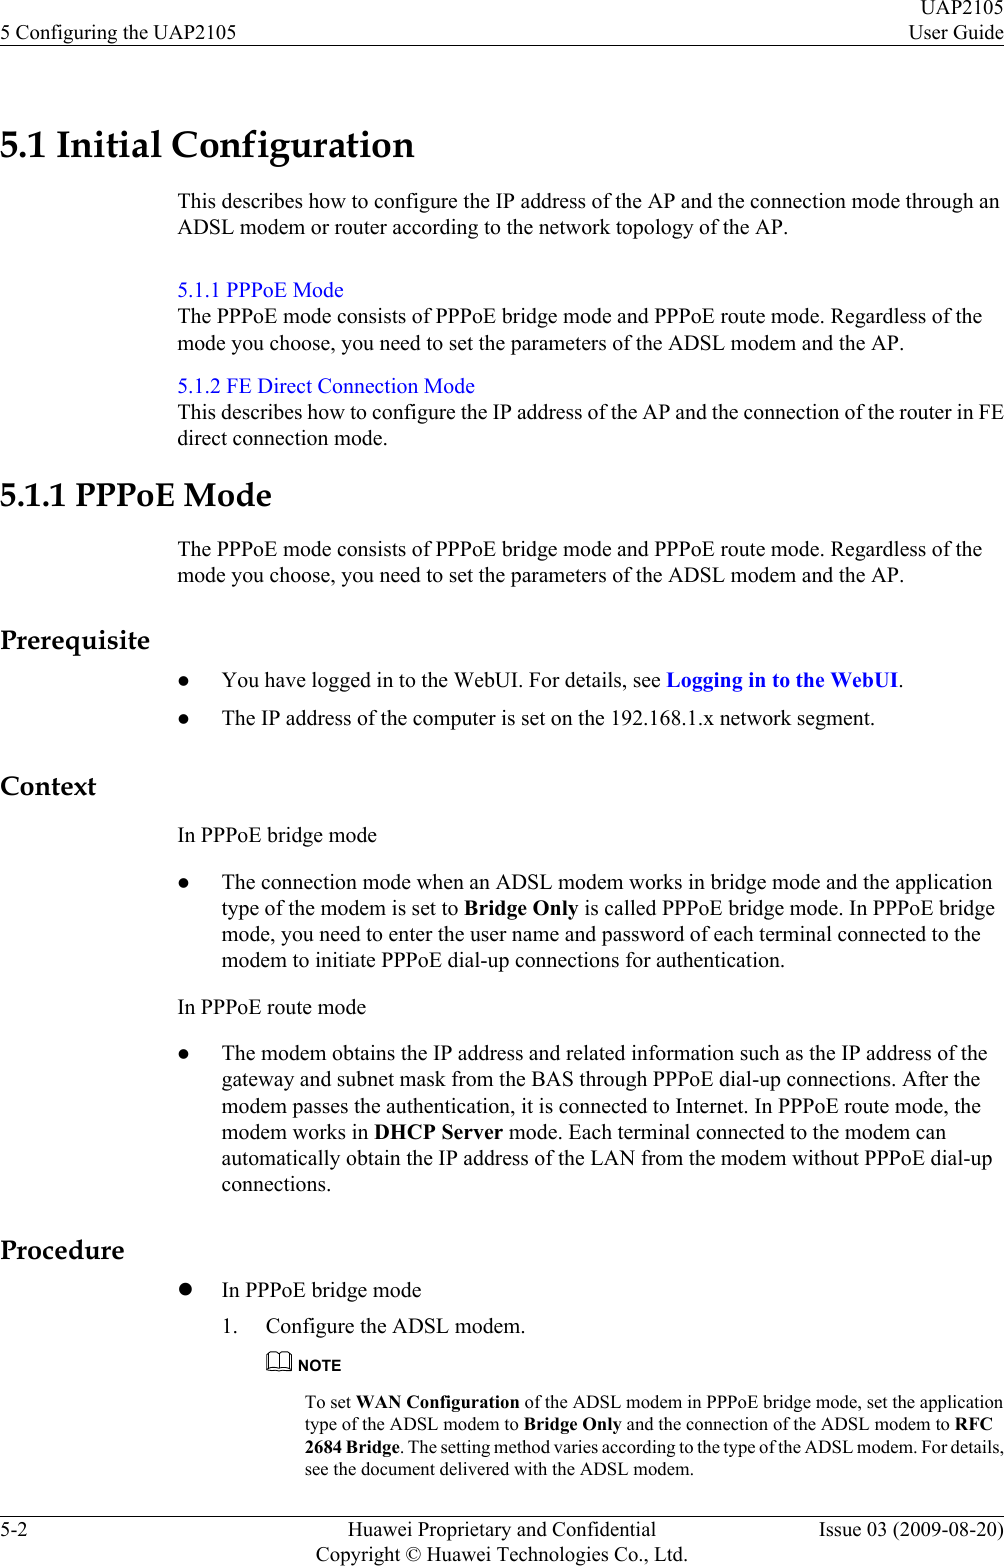 5.1 Initial ConfigurationThis describes how to configure the IP address of the AP and the connection mode through anADSL modem or router according to the network topology of the AP.5.1.1 PPPoE ModeThe PPPoE mode consists of PPPoE bridge mode and PPPoE route mode. Regardless of themode you choose, you need to set the parameters of the ADSL modem and the AP.5.1.2 FE Direct Connection ModeThis describes how to configure the IP address of the AP and the connection of the router in FEdirect connection mode.5.1.1 PPPoE ModeThe PPPoE mode consists of PPPoE bridge mode and PPPoE route mode. Regardless of themode you choose, you need to set the parameters of the ADSL modem and the AP.PrerequisitelYou have logged in to the WebUI. For details, see Logging in to the WebUI.lThe IP address of the computer is set on the 192.168.1.x network segment.ContextIn PPPoE bridge modelThe connection mode when an ADSL modem works in bridge mode and the applicationtype of the modem is set to Bridge Only is called PPPoE bridge mode. In PPPoE bridgemode, you need to enter the user name and password of each terminal connected to themodem to initiate PPPoE dial-up connections for authentication.In PPPoE route modelThe modem obtains the IP address and related information such as the IP address of thegateway and subnet mask from the BAS through PPPoE dial-up connections. After themodem passes the authentication, it is connected to Internet. In PPPoE route mode, themodem works in DHCP Server mode. Each terminal connected to the modem canautomatically obtain the IP address of the LAN from the modem without PPPoE dial-upconnections.ProcedurelIn PPPoE bridge mode1. Configure the ADSL modem.NOTETo set WAN Configuration of the ADSL modem in PPPoE bridge mode, set the applicationtype of the ADSL modem to Bridge Only and the connection of the ADSL modem to RFC2684 Bridge. The setting method varies according to the type of the ADSL modem. For details,see the document delivered with the ADSL modem.5 Configuring the UAP2105UAP2105User Guide5-2 Huawei Proprietary and ConfidentialCopyright © Huawei Technologies Co., Ltd.Issue 03 (2009-08-20)